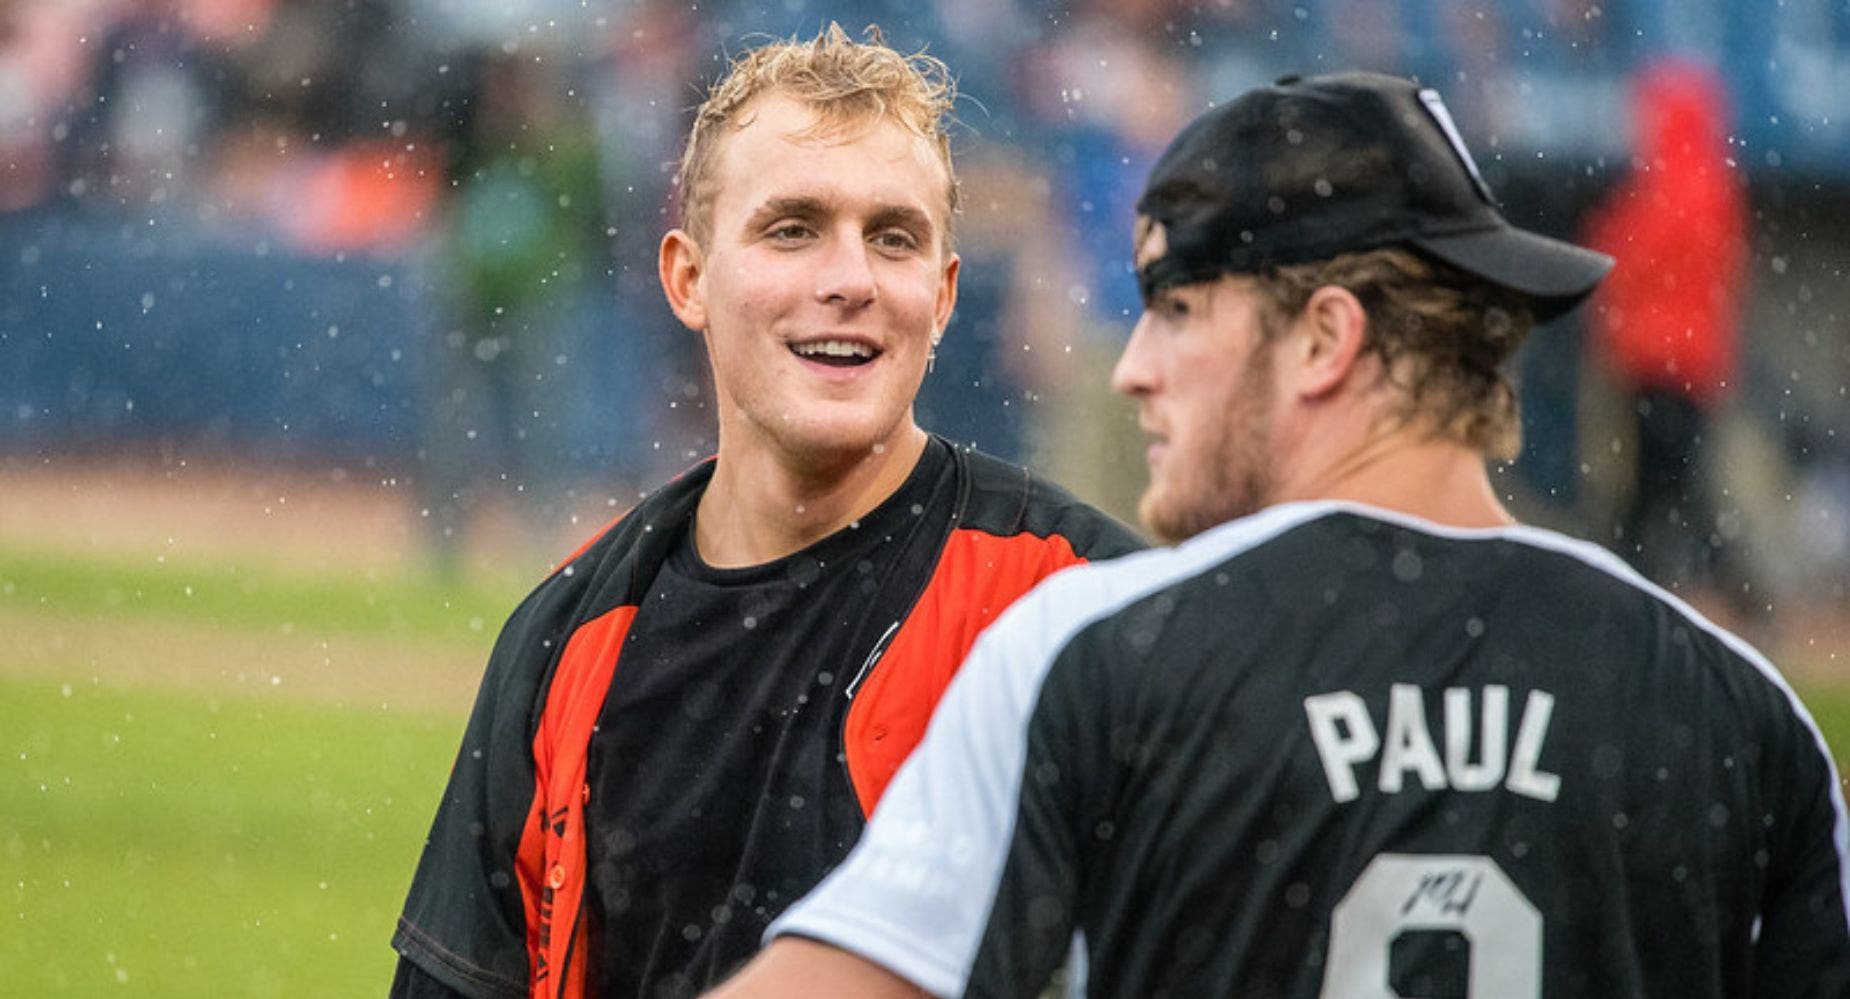 Jake Paul Aims To Make Sports Betting 'Betr' With His New $50M Venture